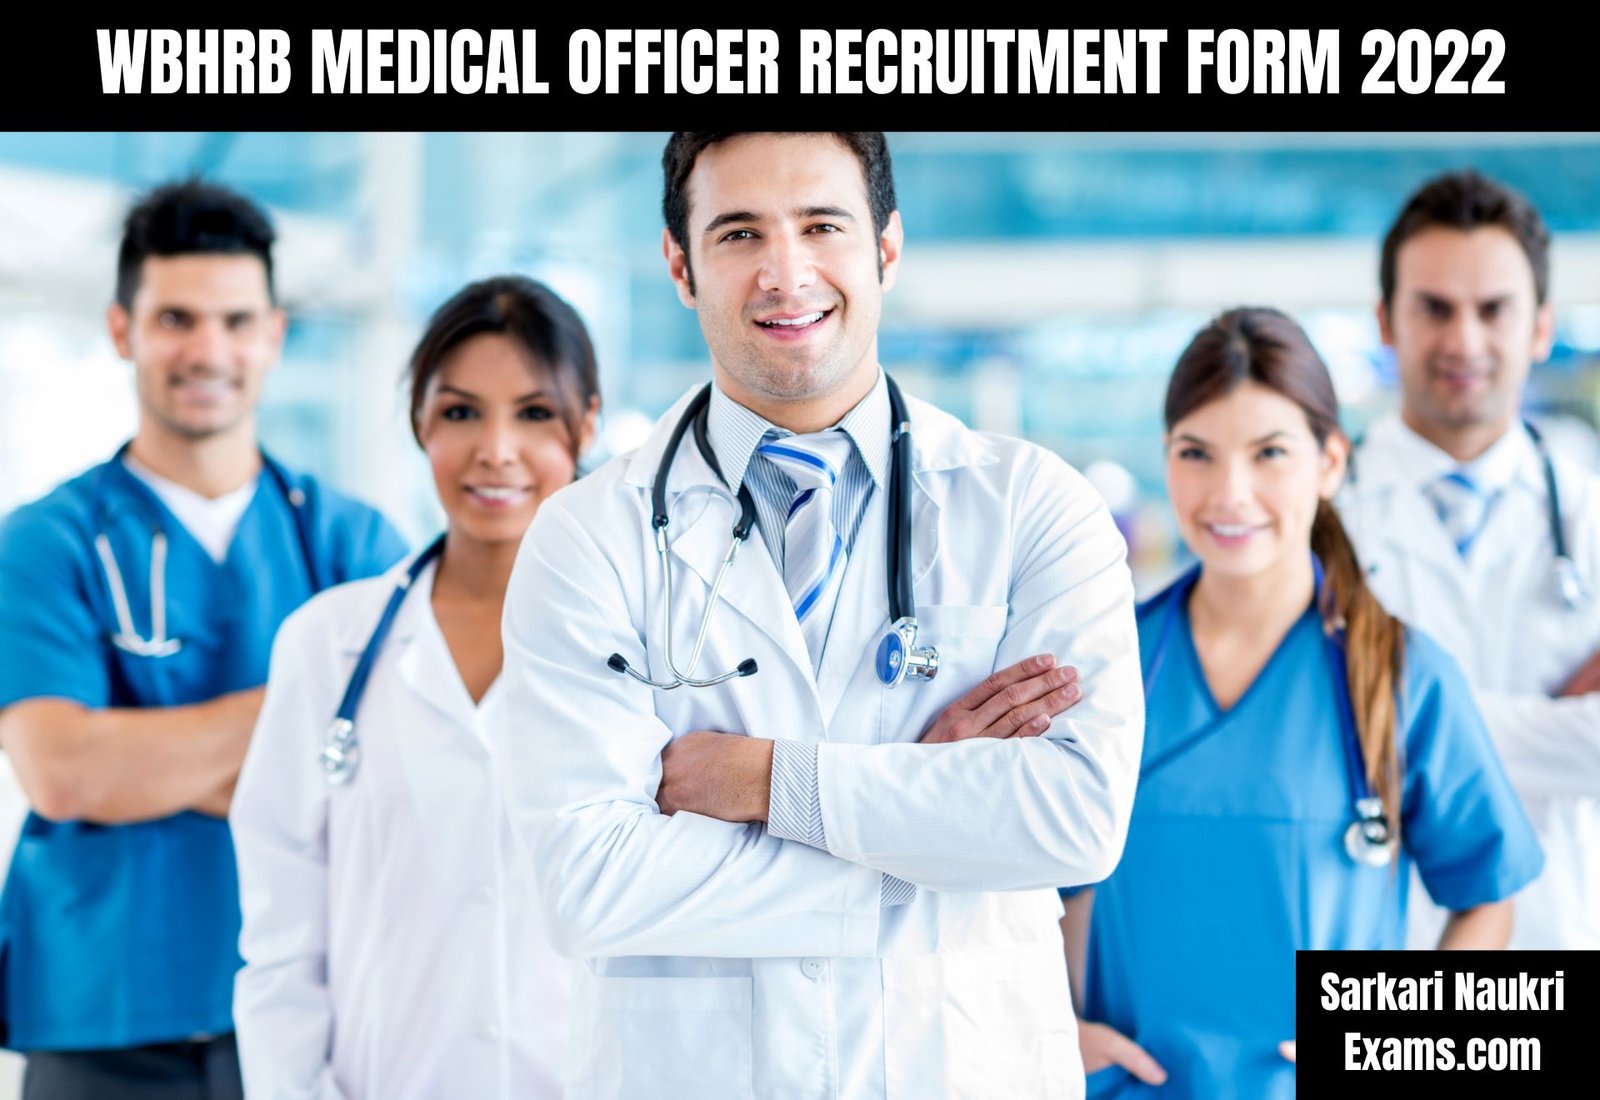 WBHRB Medical Officer Recruitment Form 2022 | Interview Based Job